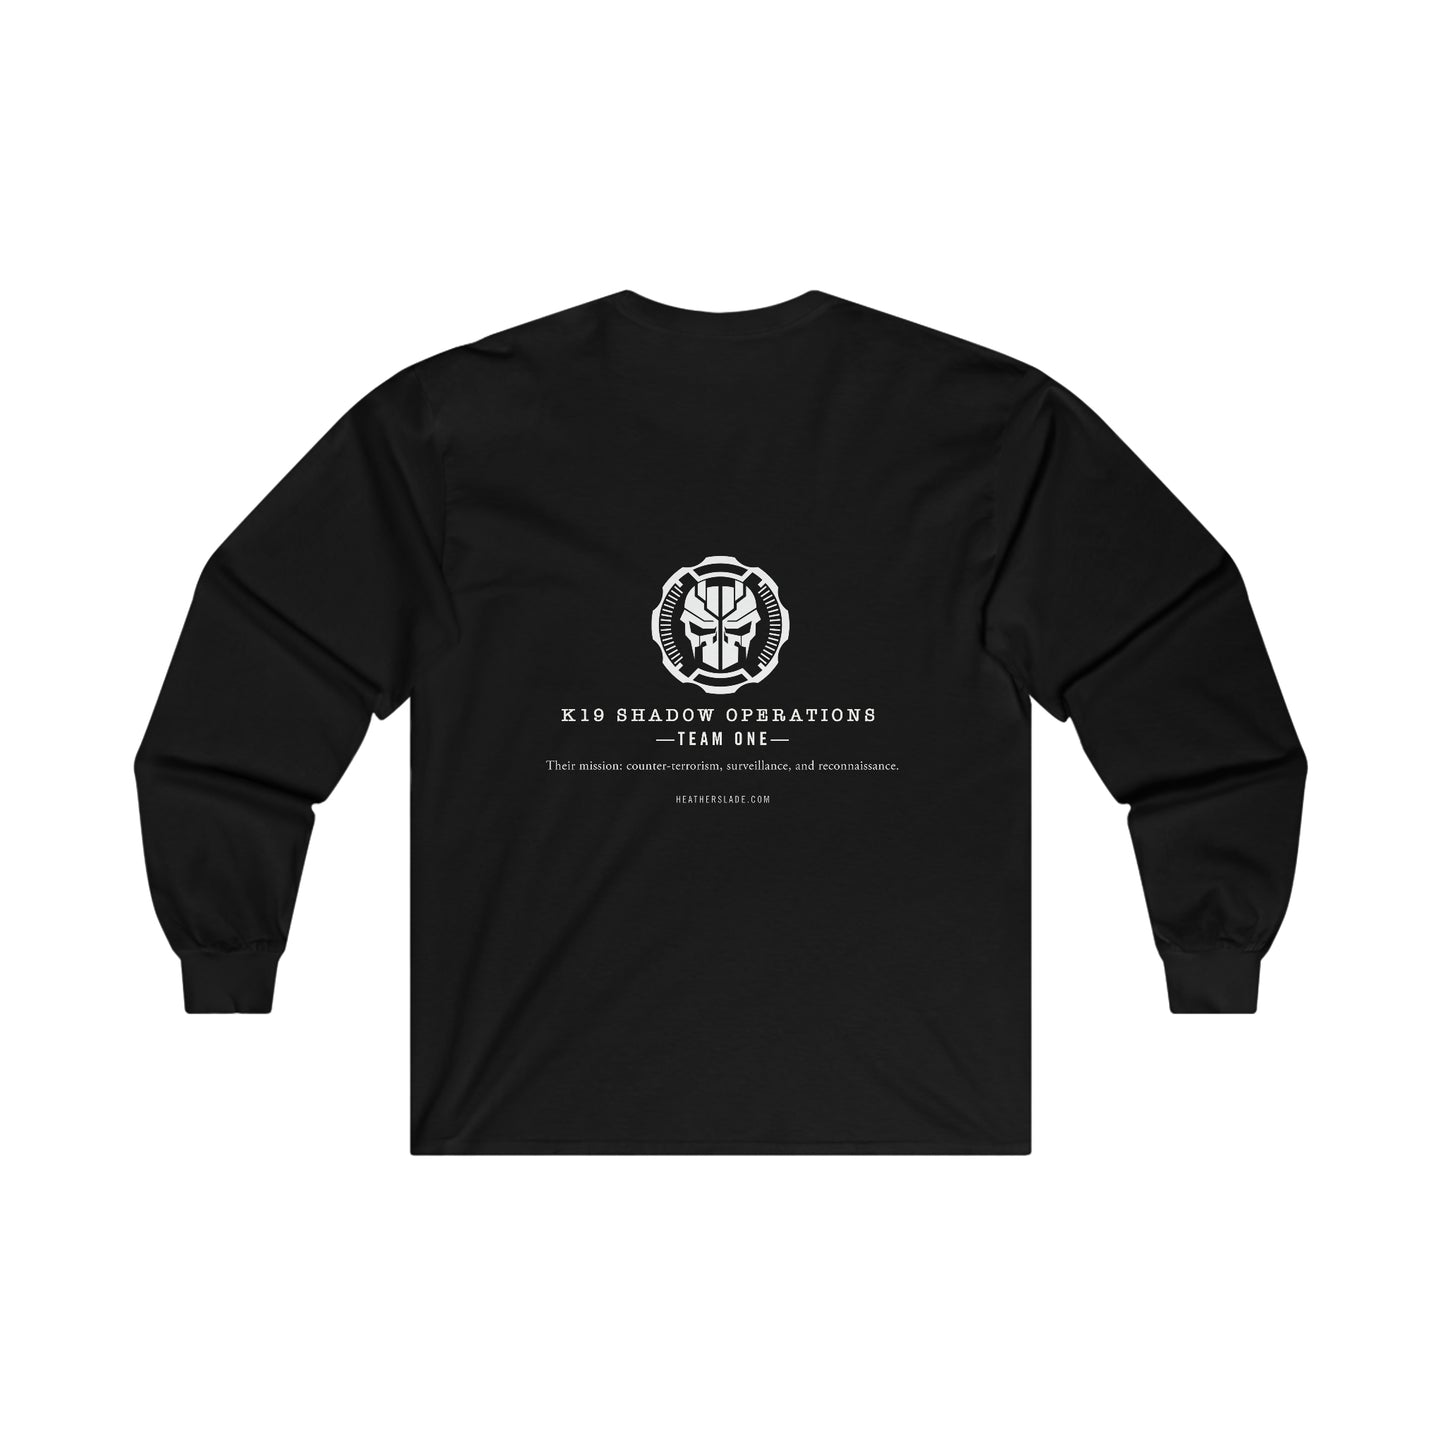 K19 Shadow Operations Team One Ultra Cotton Long Sleeve Tee